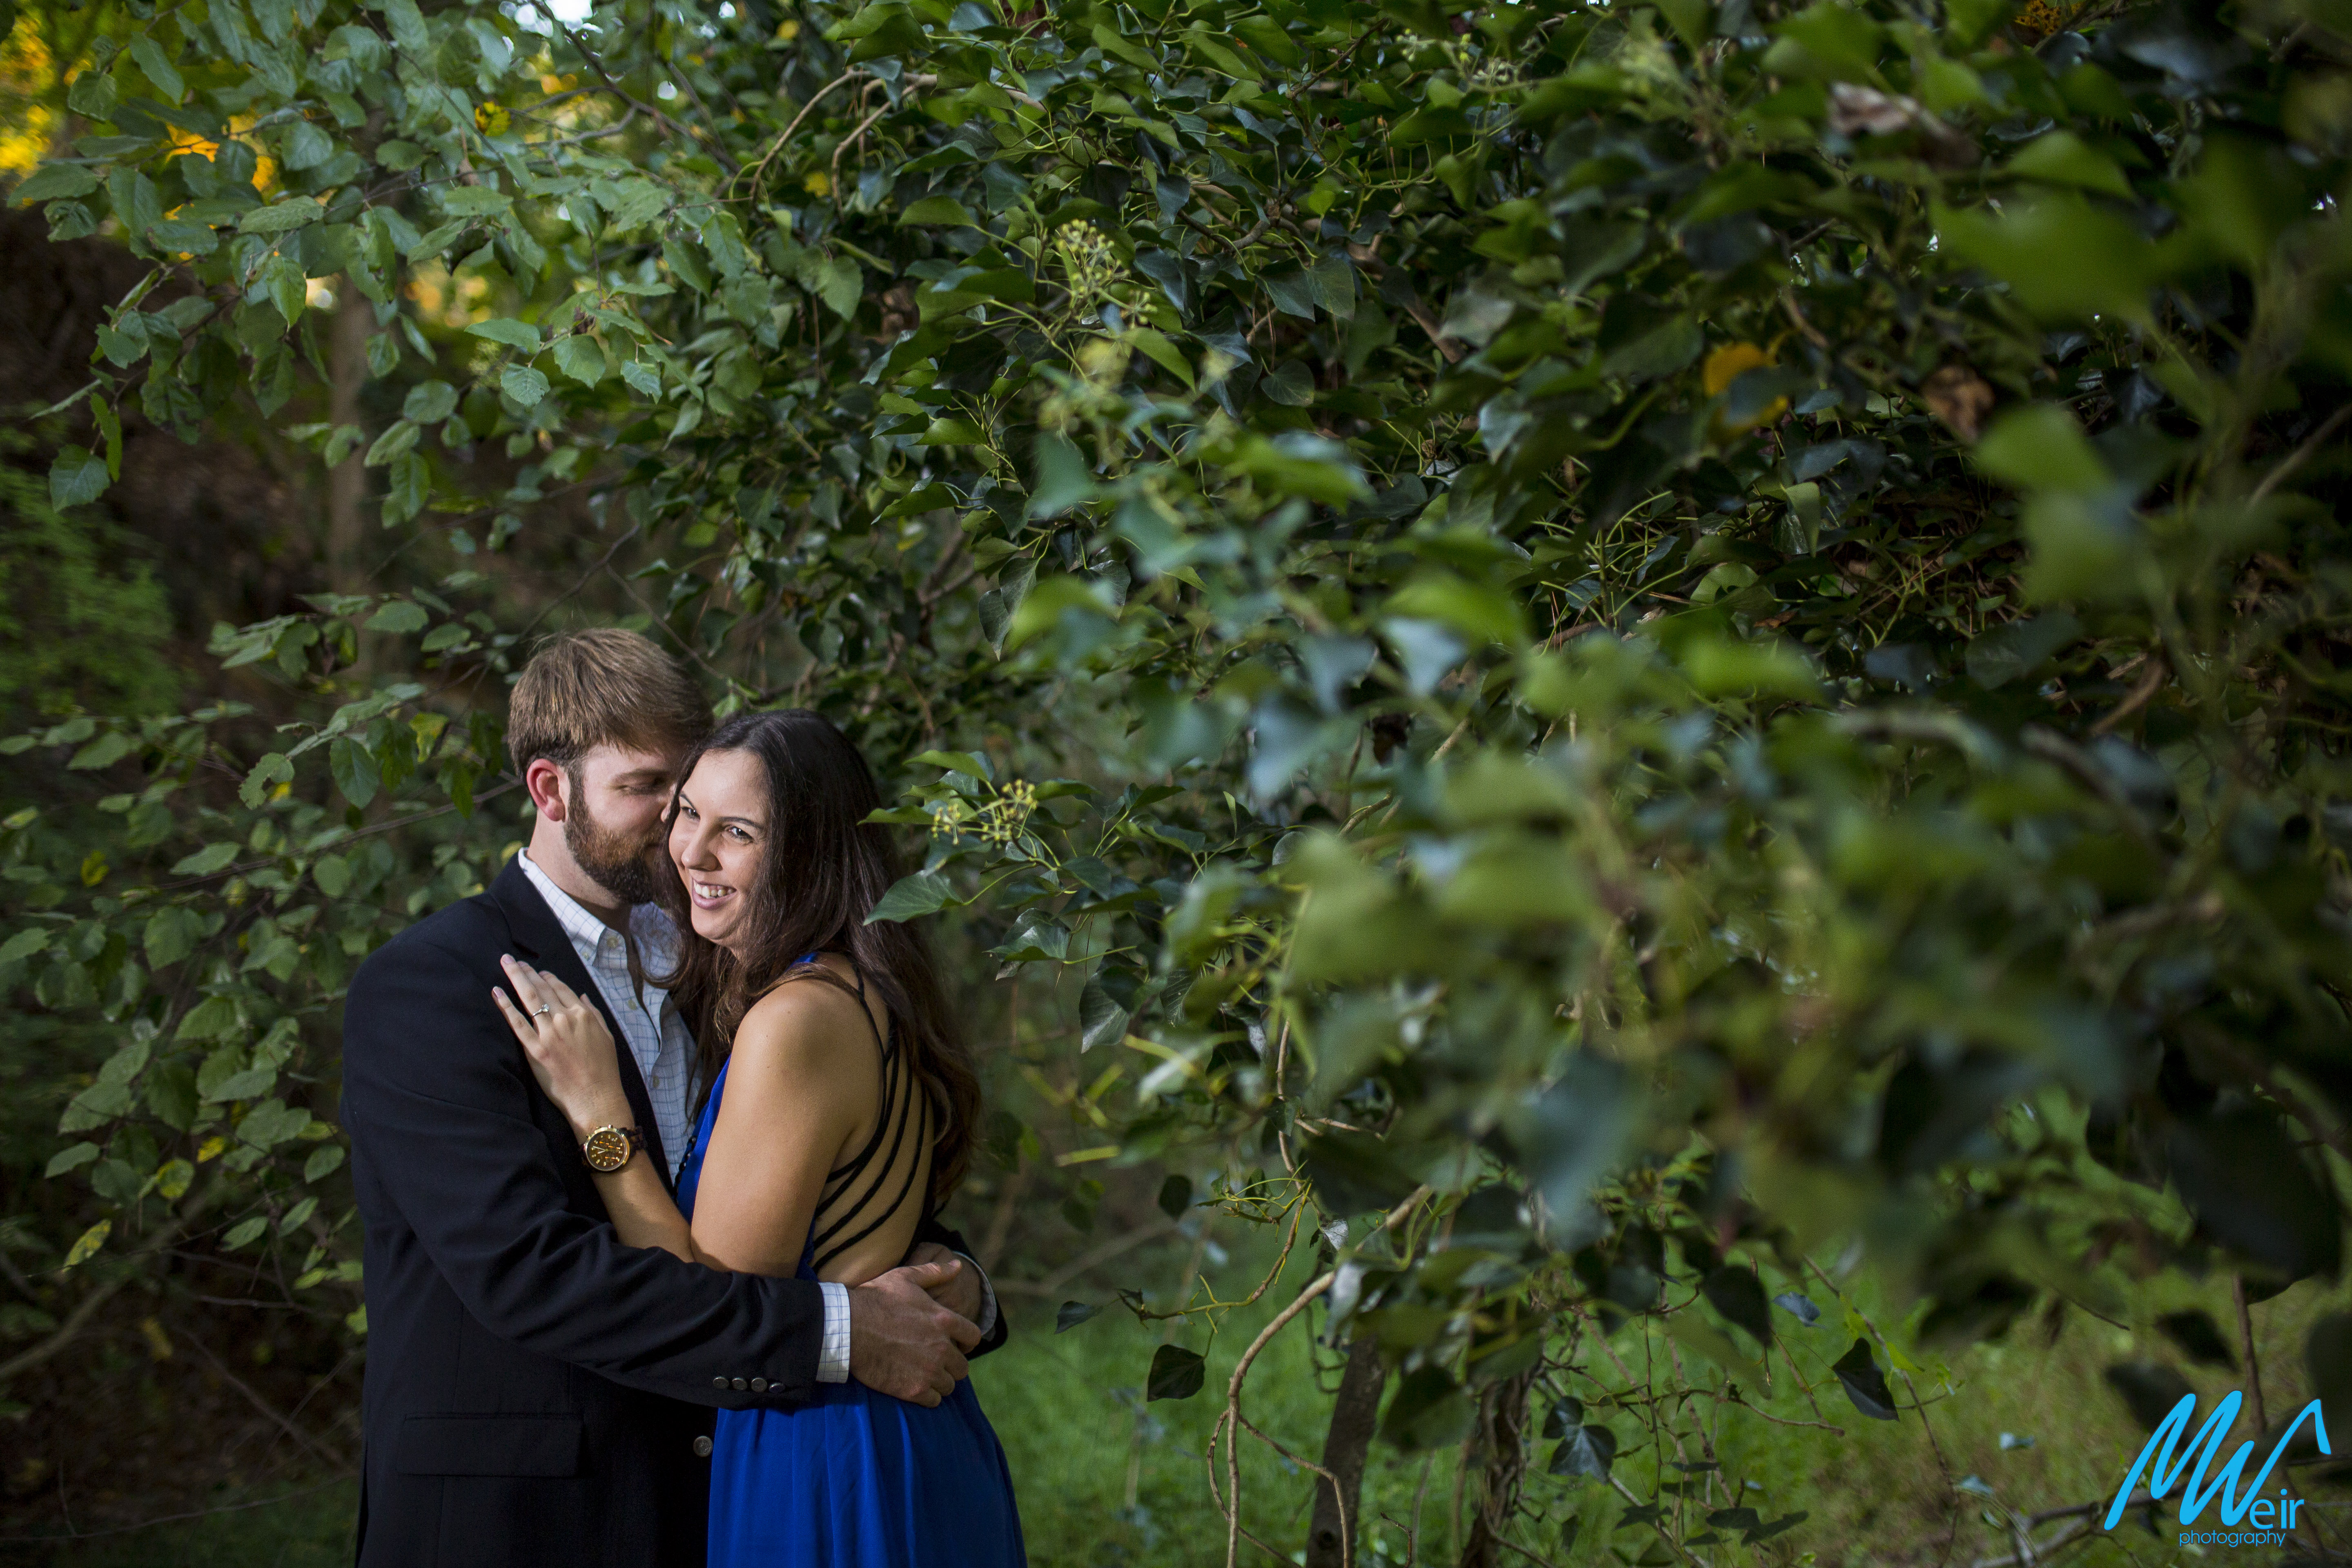 groom whispers in brides ear sweet nothings while under a low tree